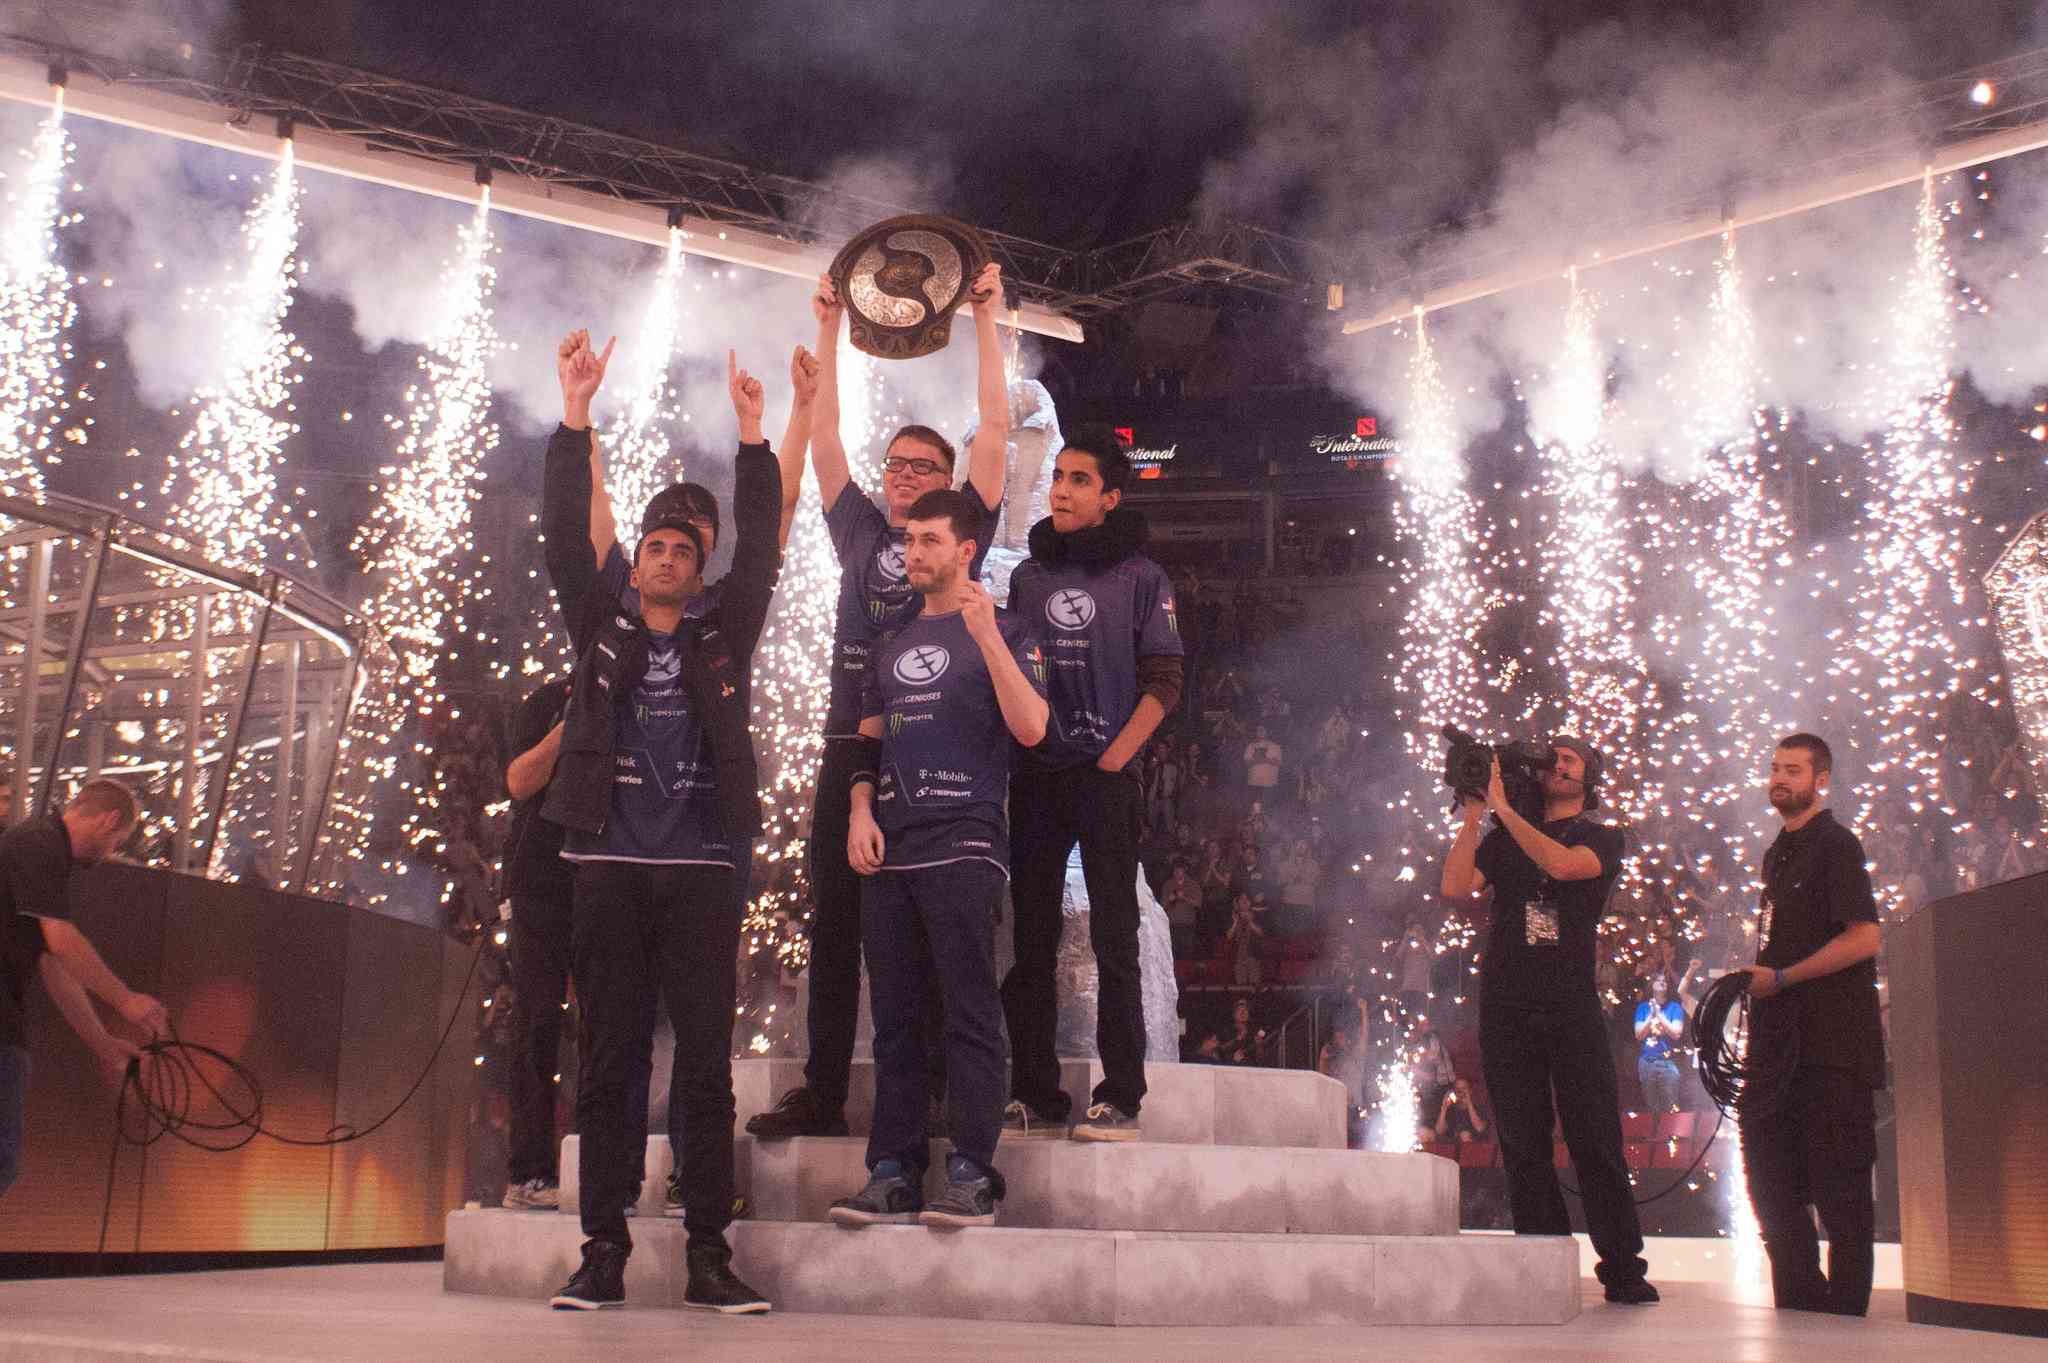 Who will ever forget Evil Geniuses' TI 5 victory? (Image Credits: Valve)